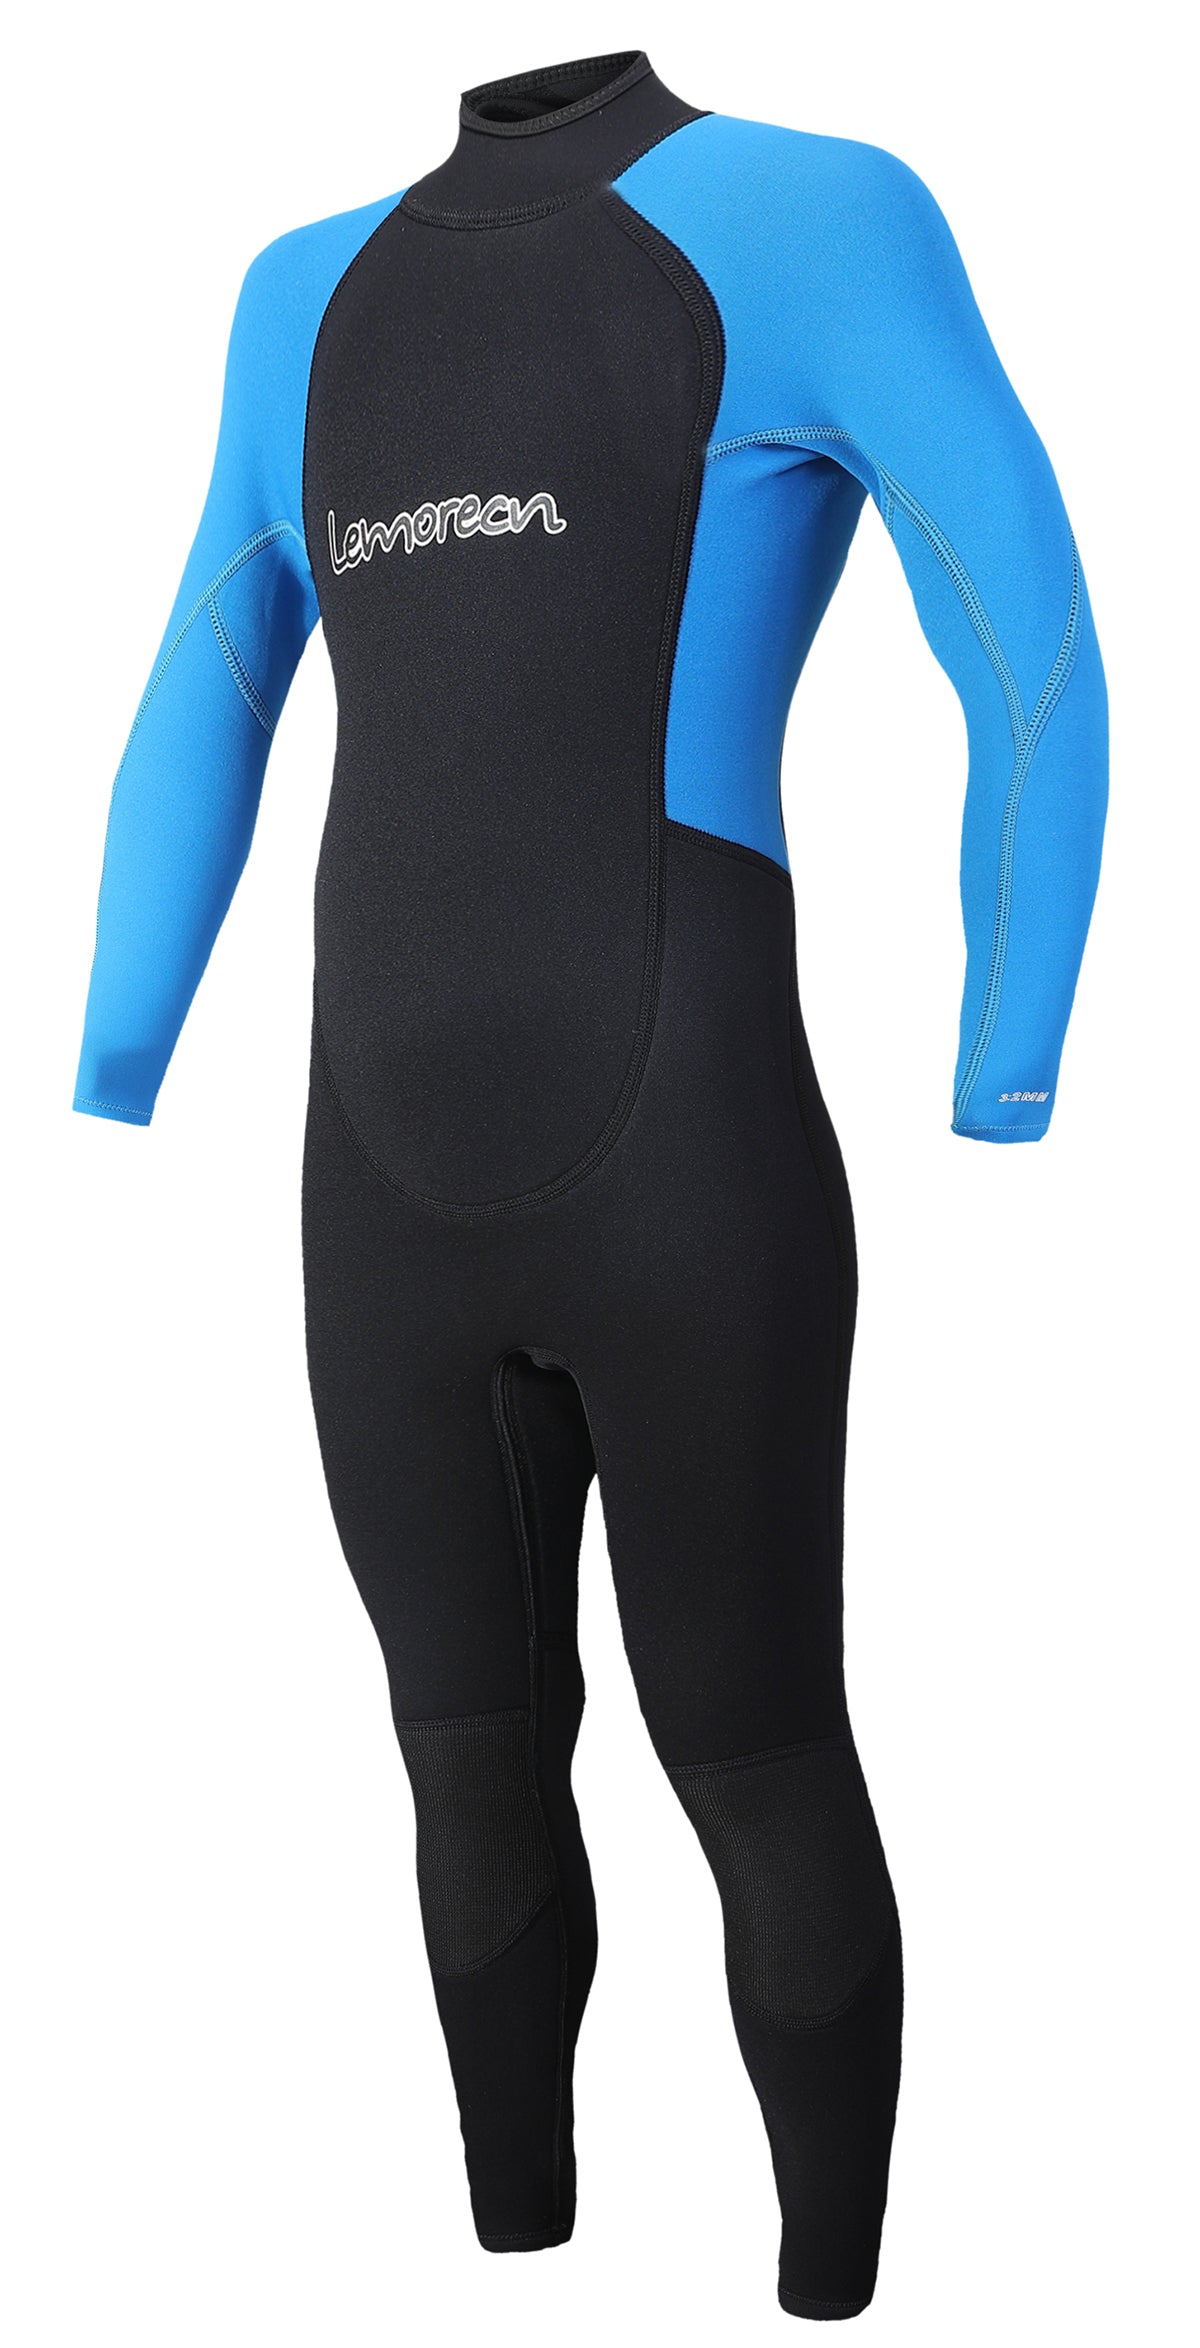 Lemorecn Kids Wetsuits Youth 3/2mm Full Diving Suit For Swimming Surfi